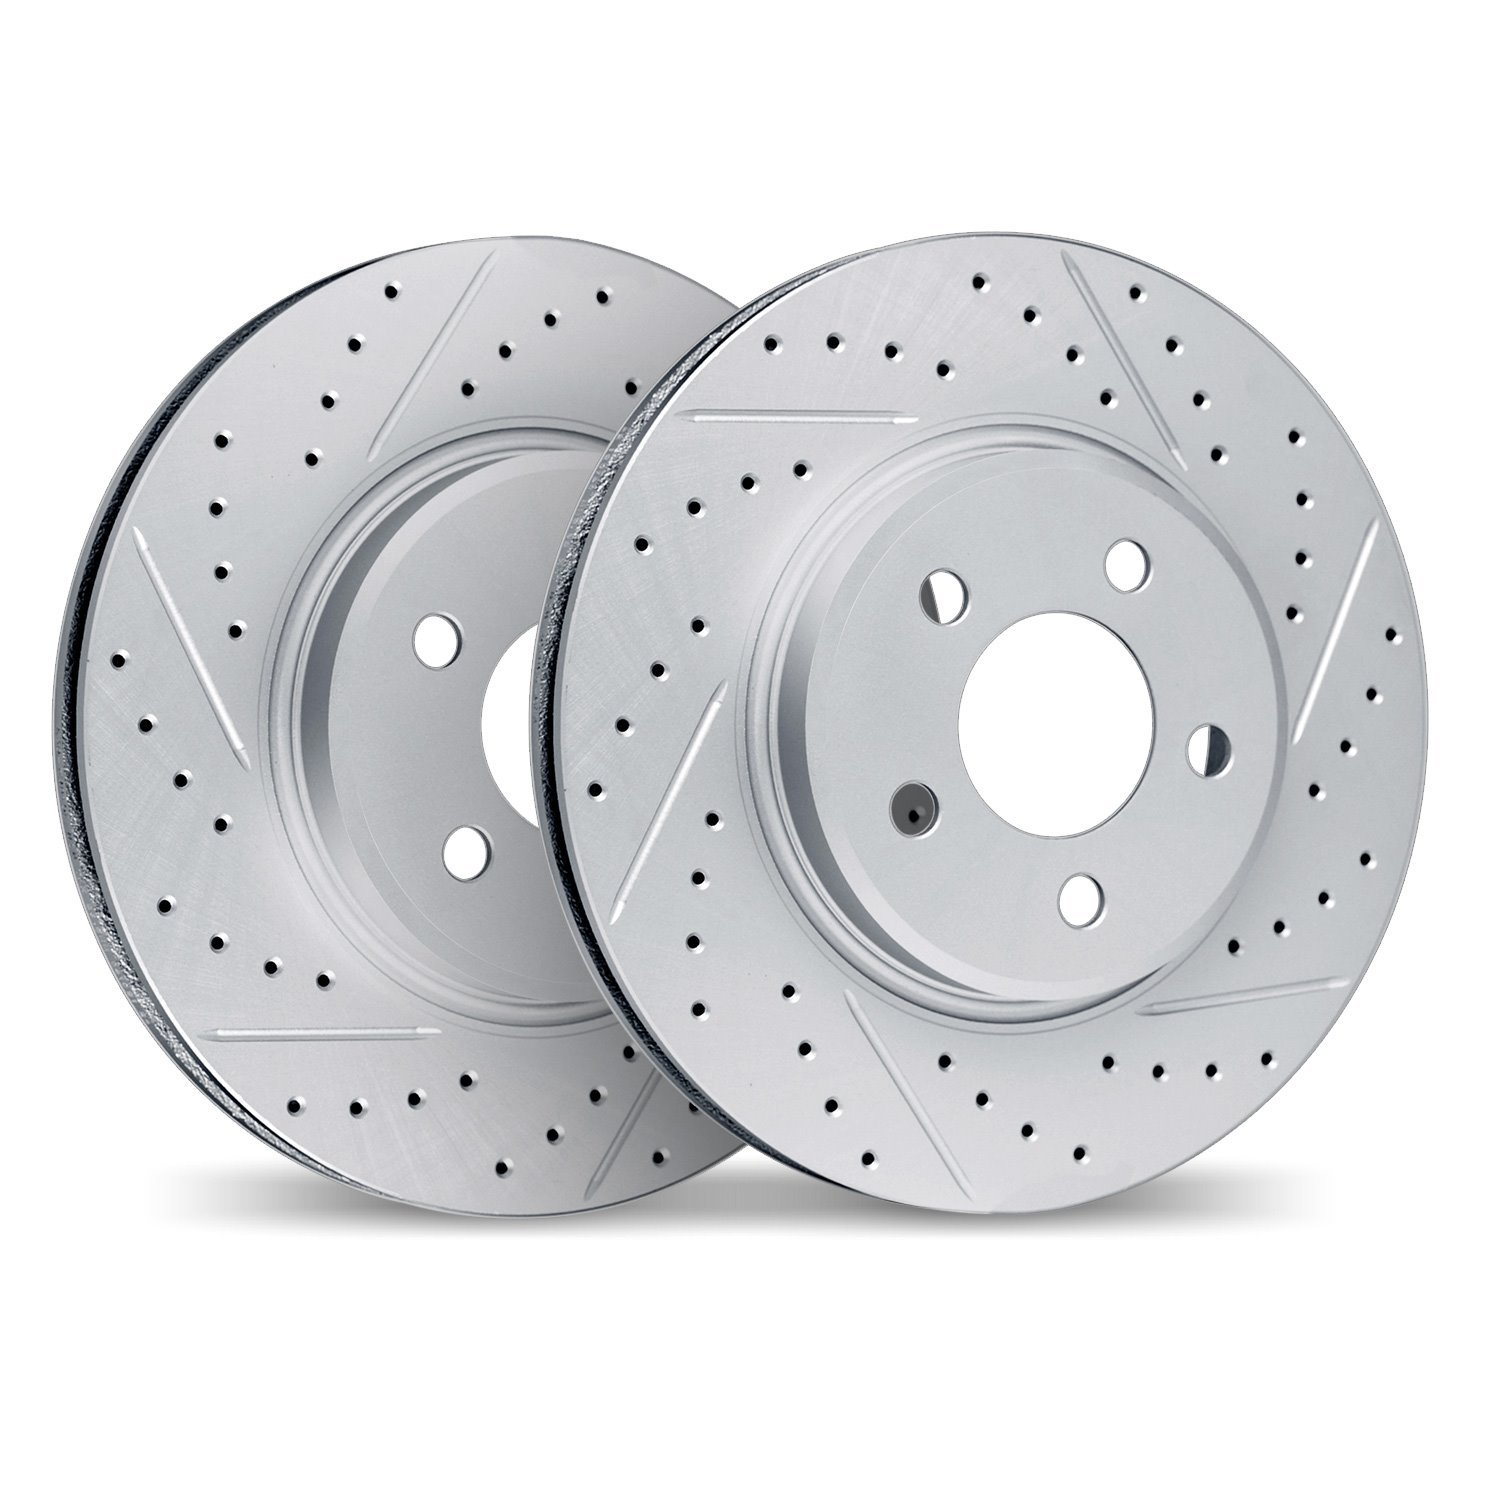 2002-80024 Geoperformance Drilled/Slotted Brake Rotors, 2006-2015 Ford/Lincoln/Mercury/Mazda, Position: Front